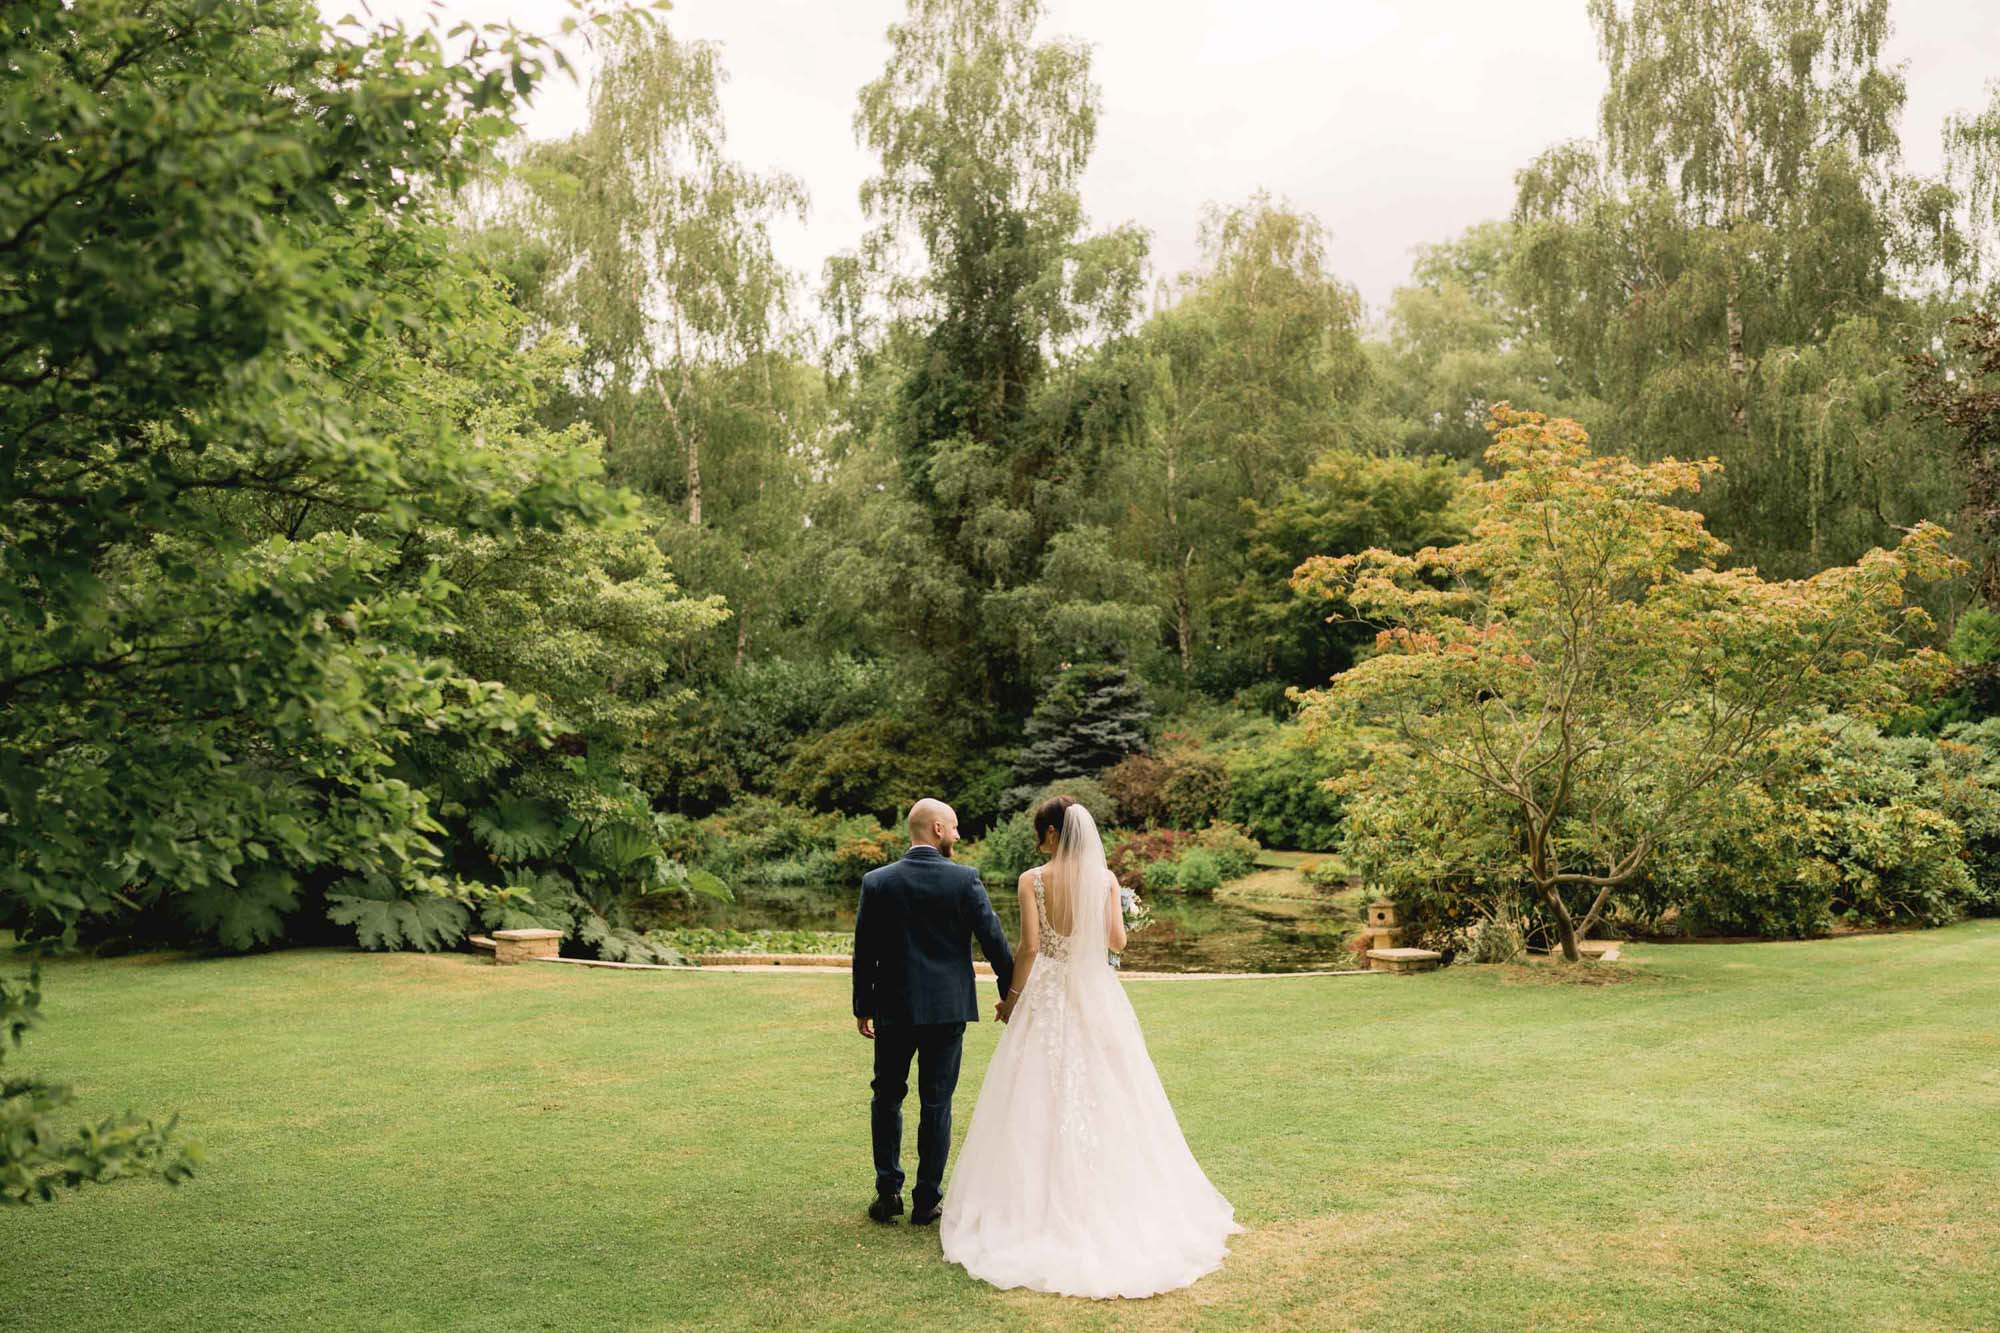 Bride and groom take a stroll on their wedding day at Rivervale Barn venue.